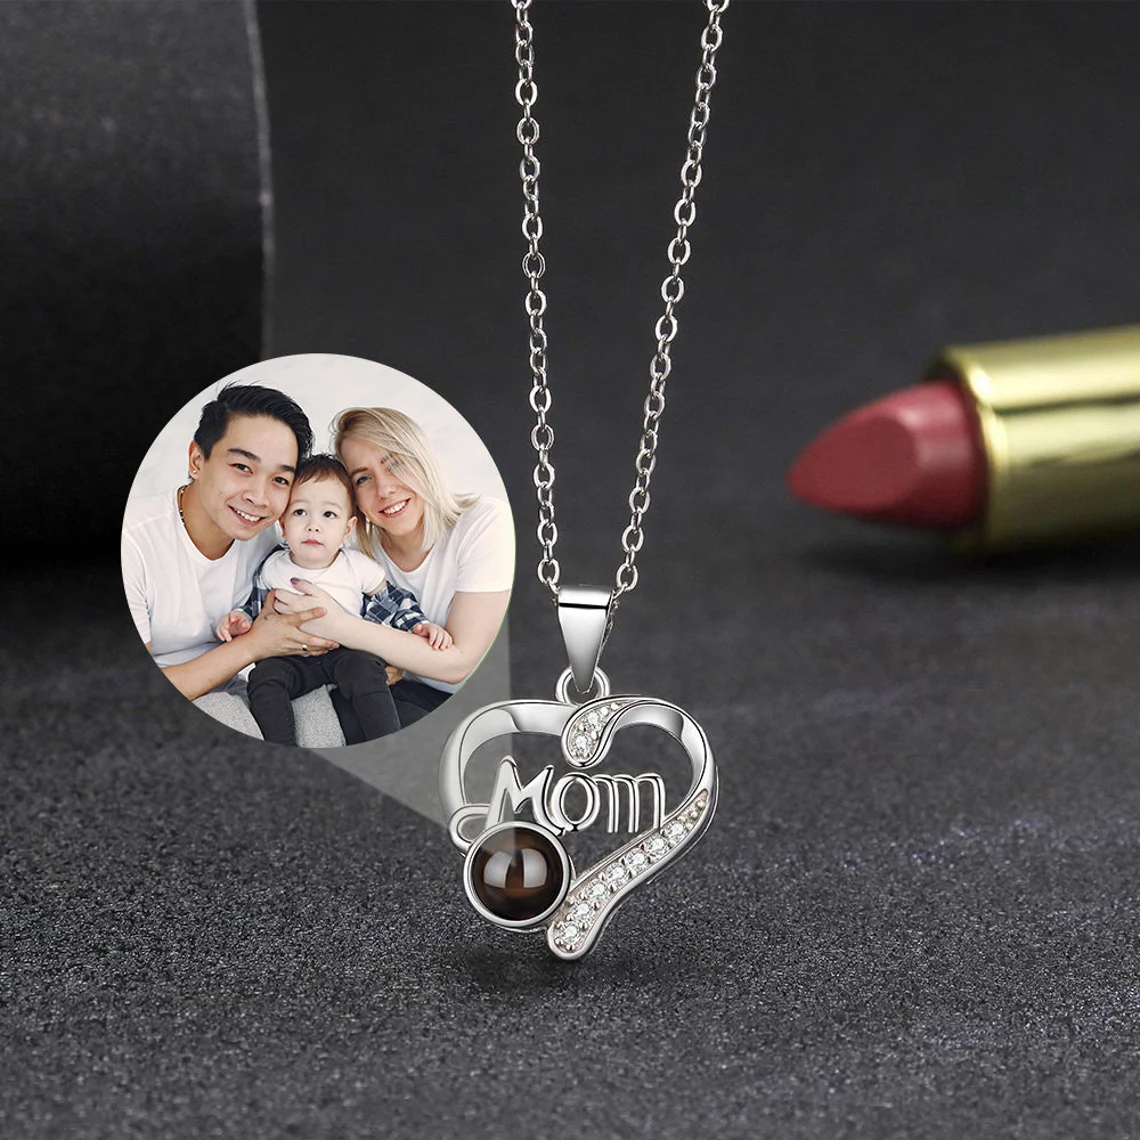 Zirconia Personalized Custom Photo Projection Necklace Gift for Mom